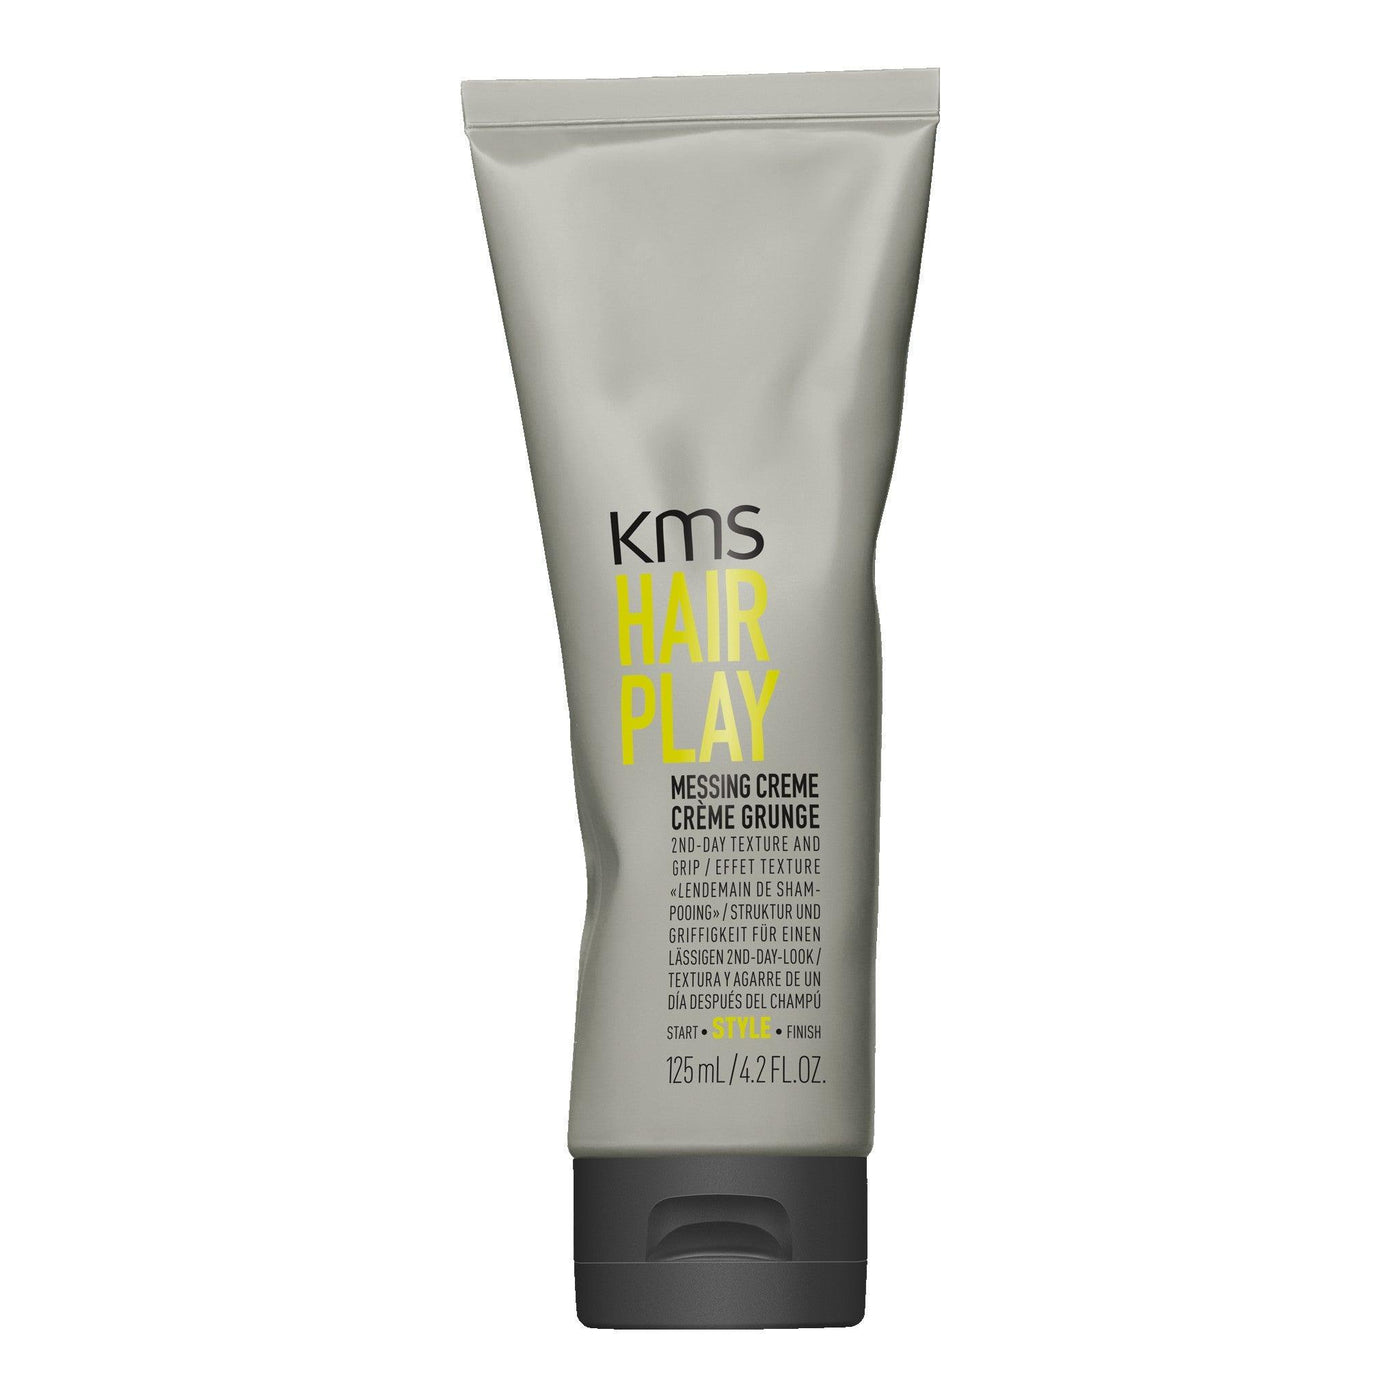 Kms Hairplay Messing Creme 125ml KMS Boutique Deauville